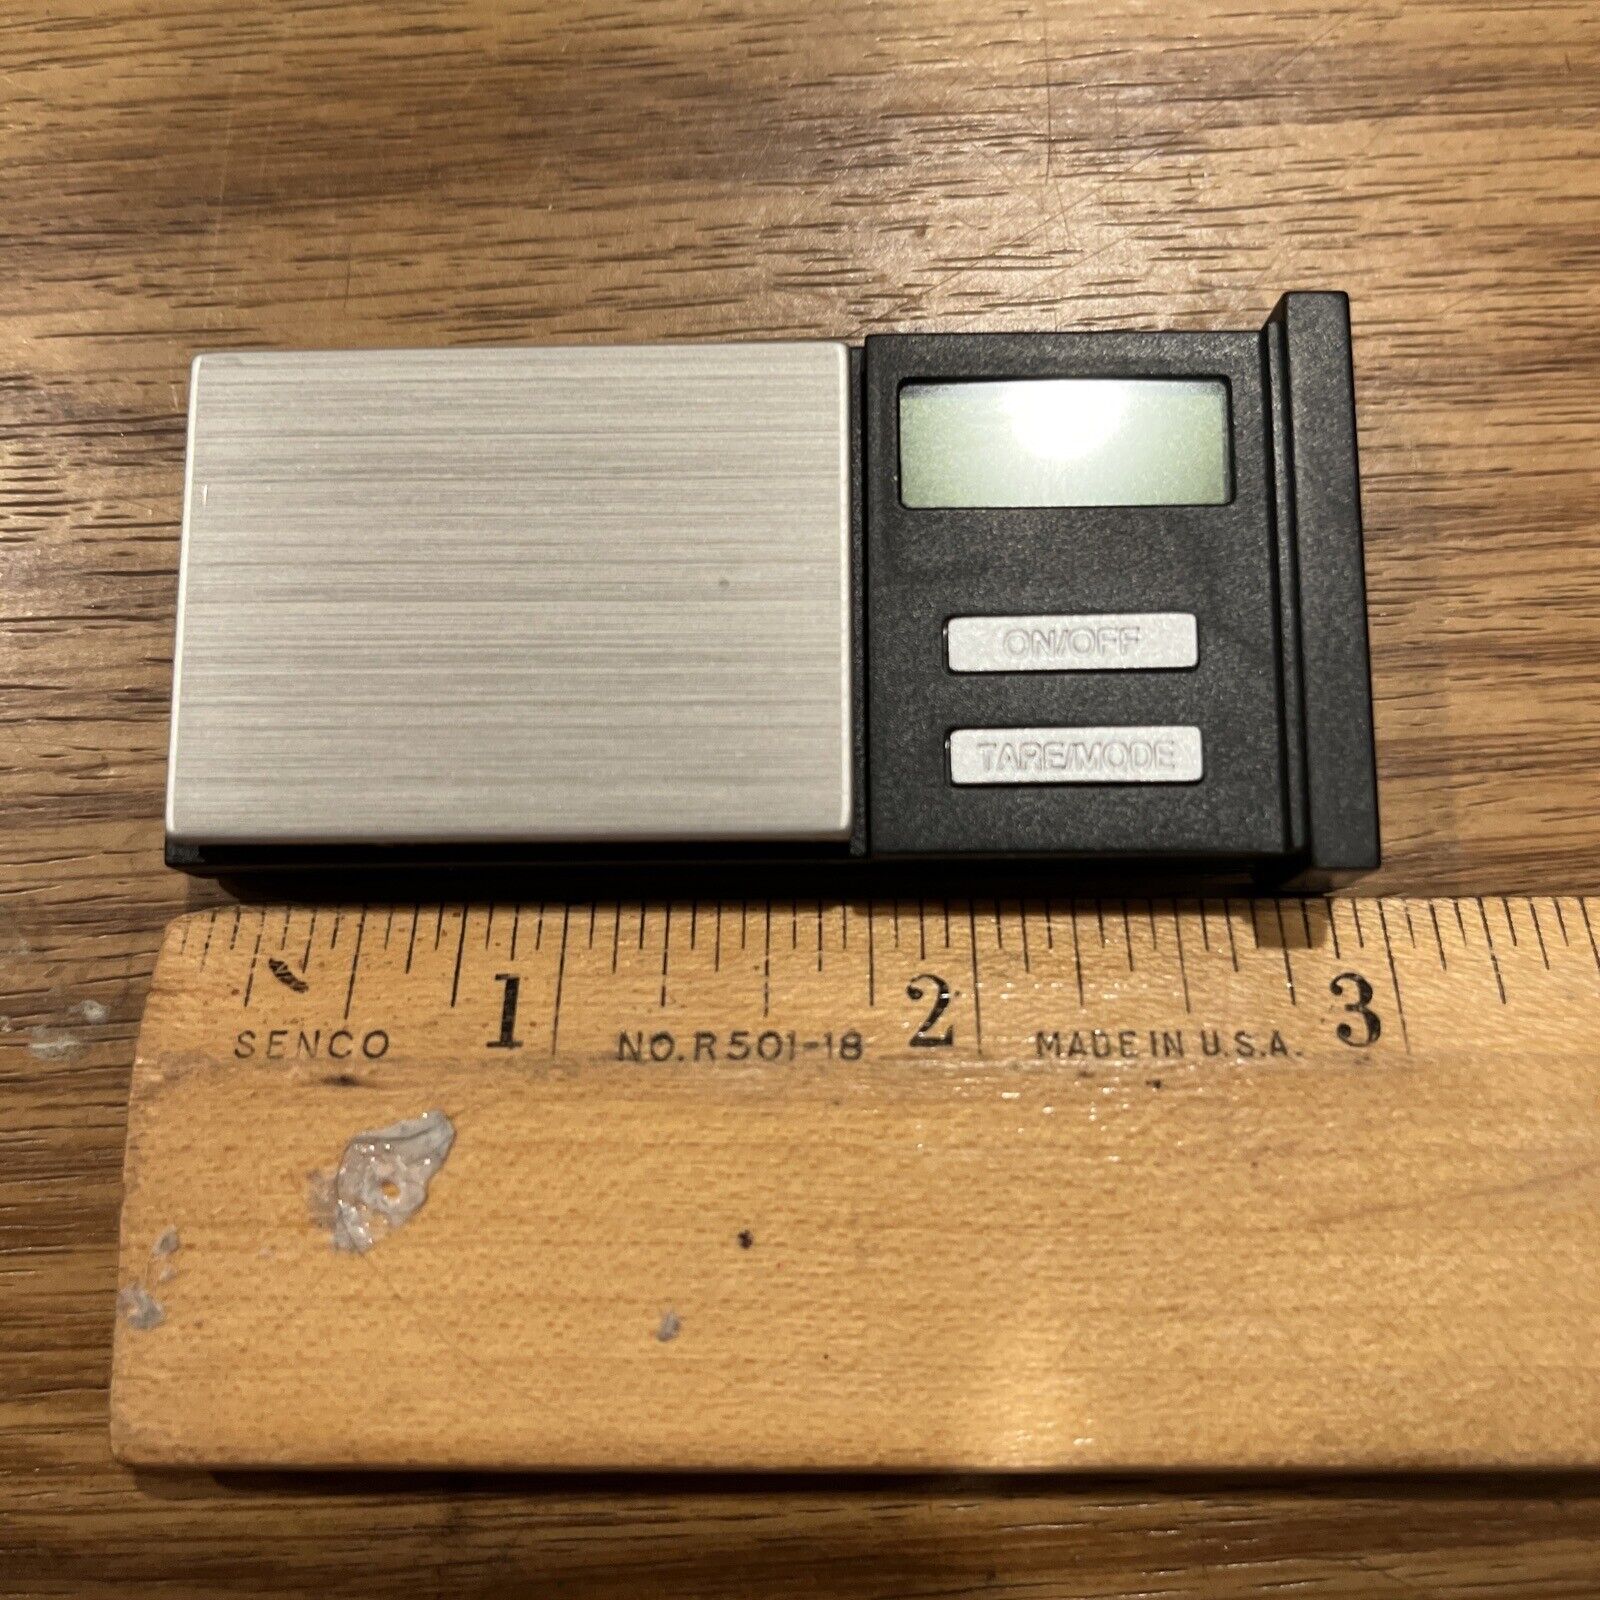 MATCHBOX SCALE / 3”x 1.5” / AWS / Cr2032 Battery / Weighs Up To 100g